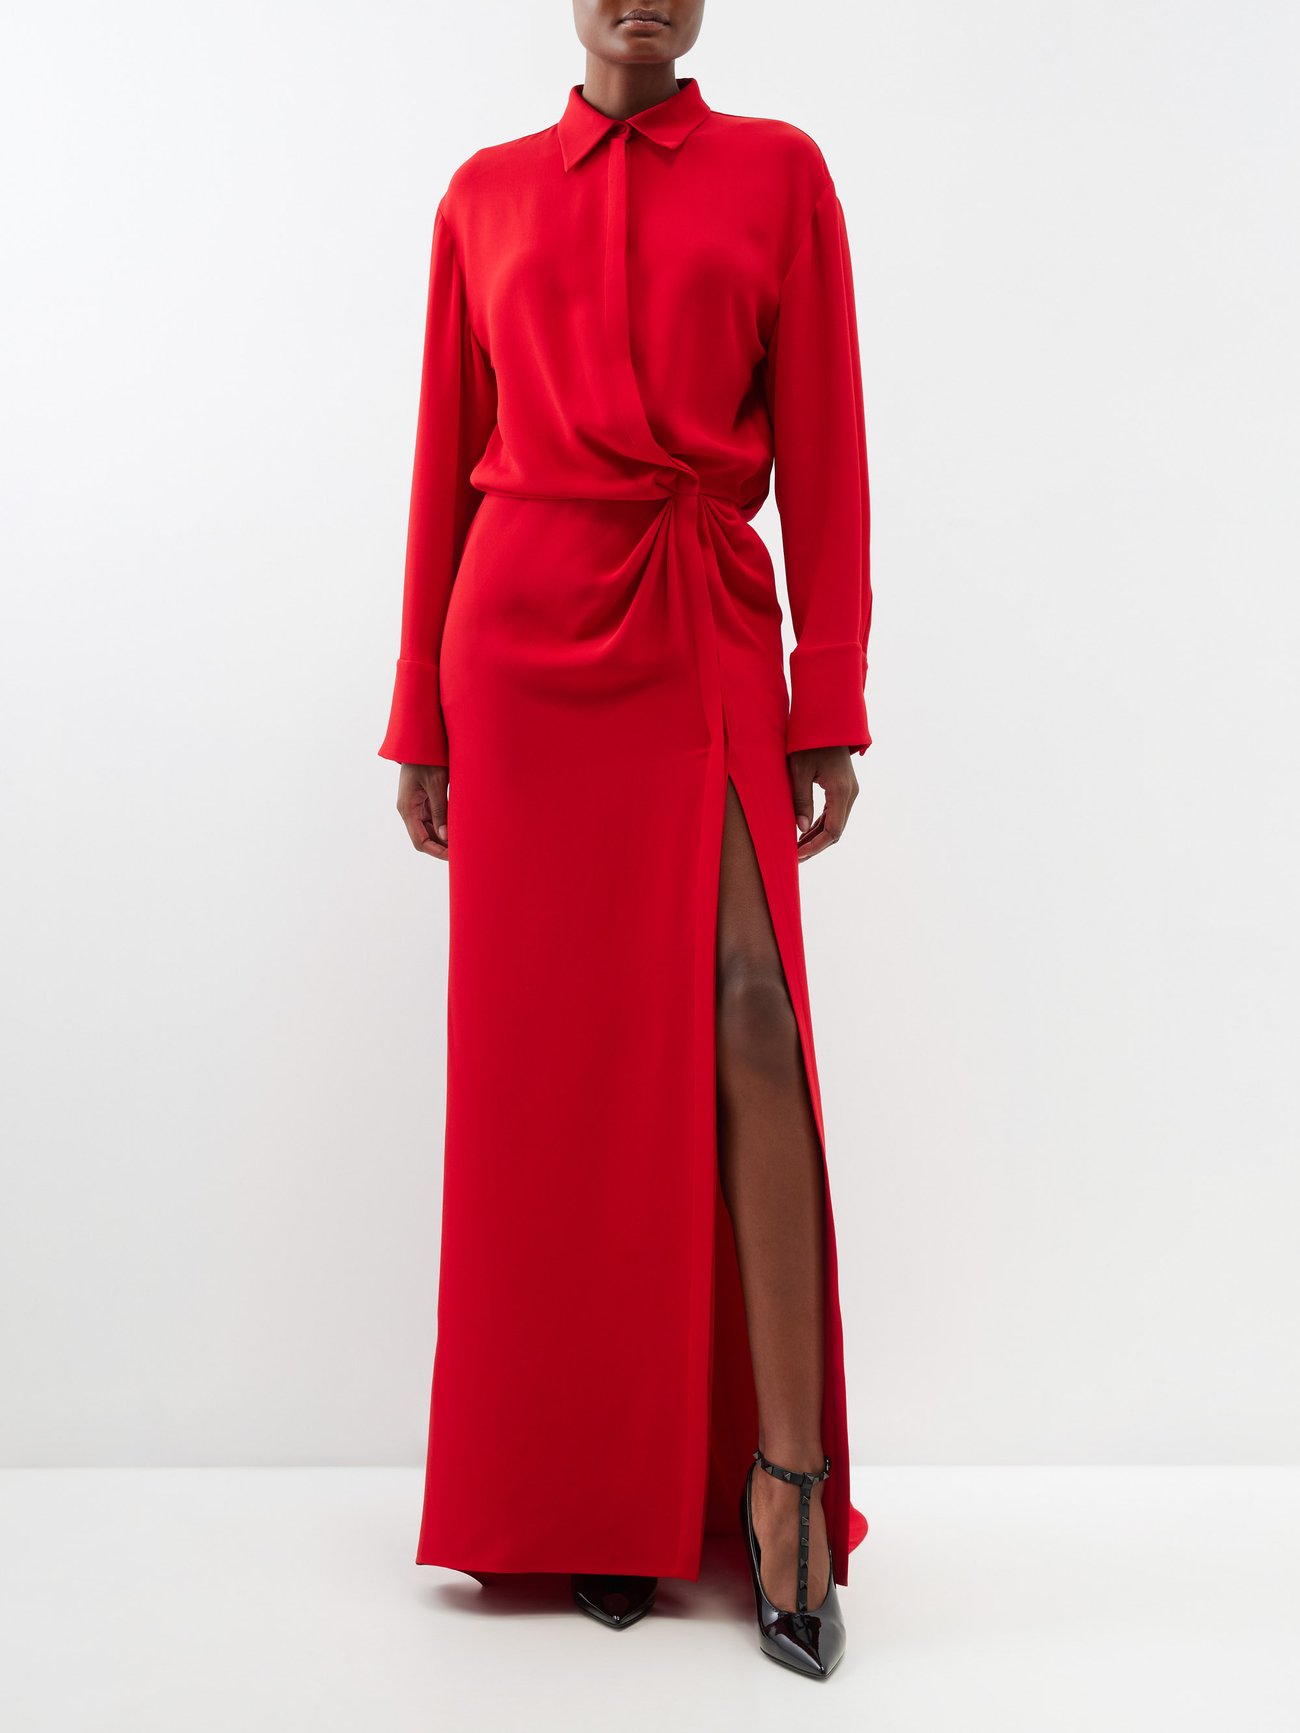 Cady Couture silk shirt gown